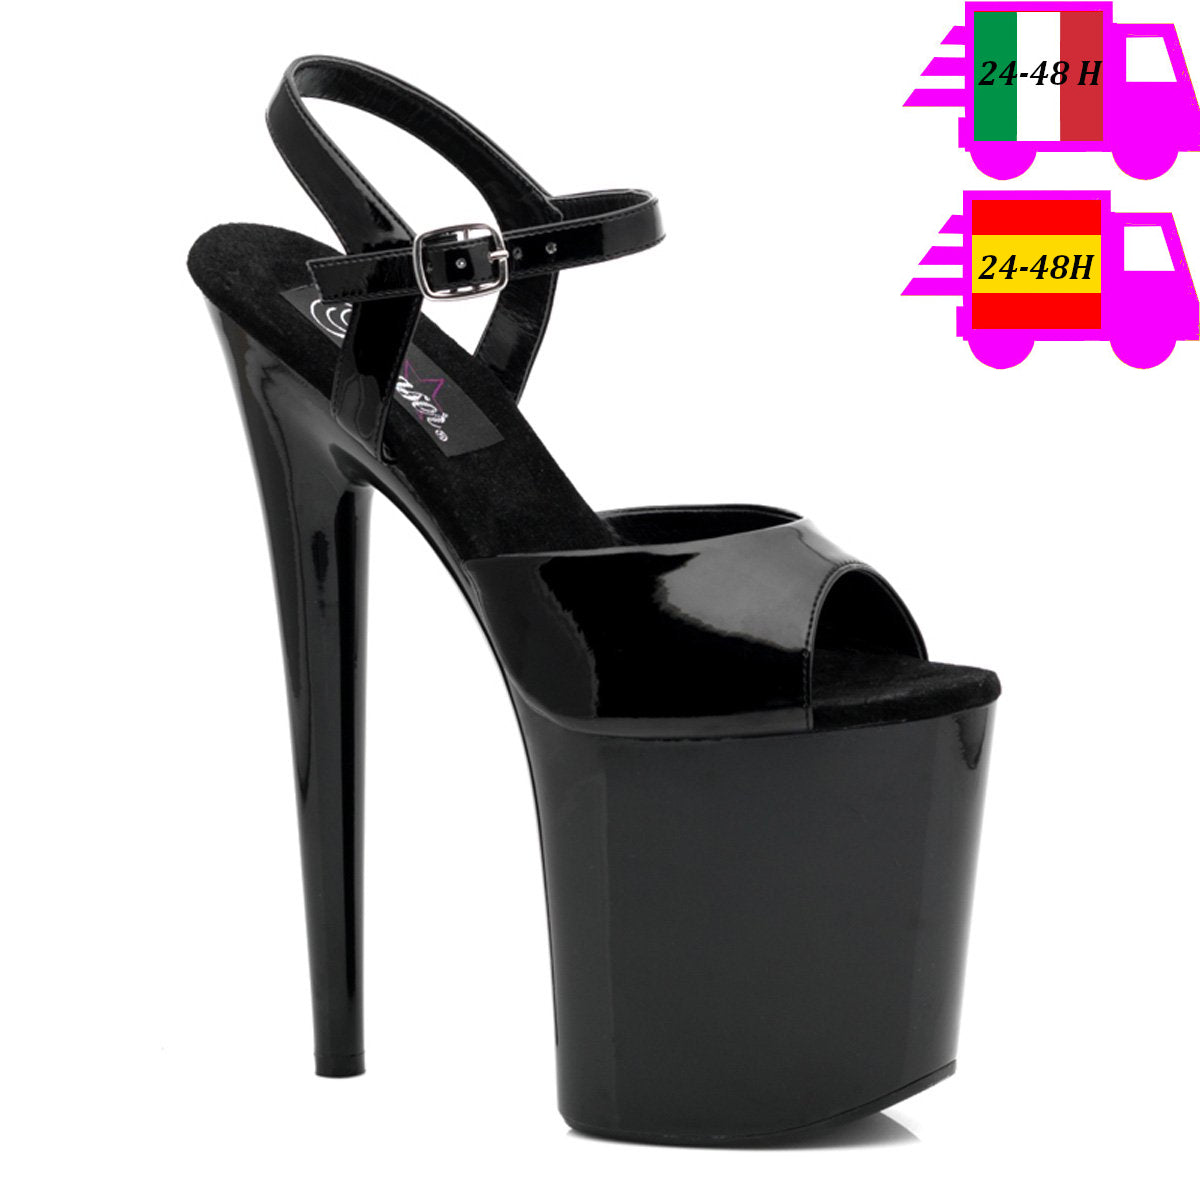 PLEASER SHOES FAST DELIVERY